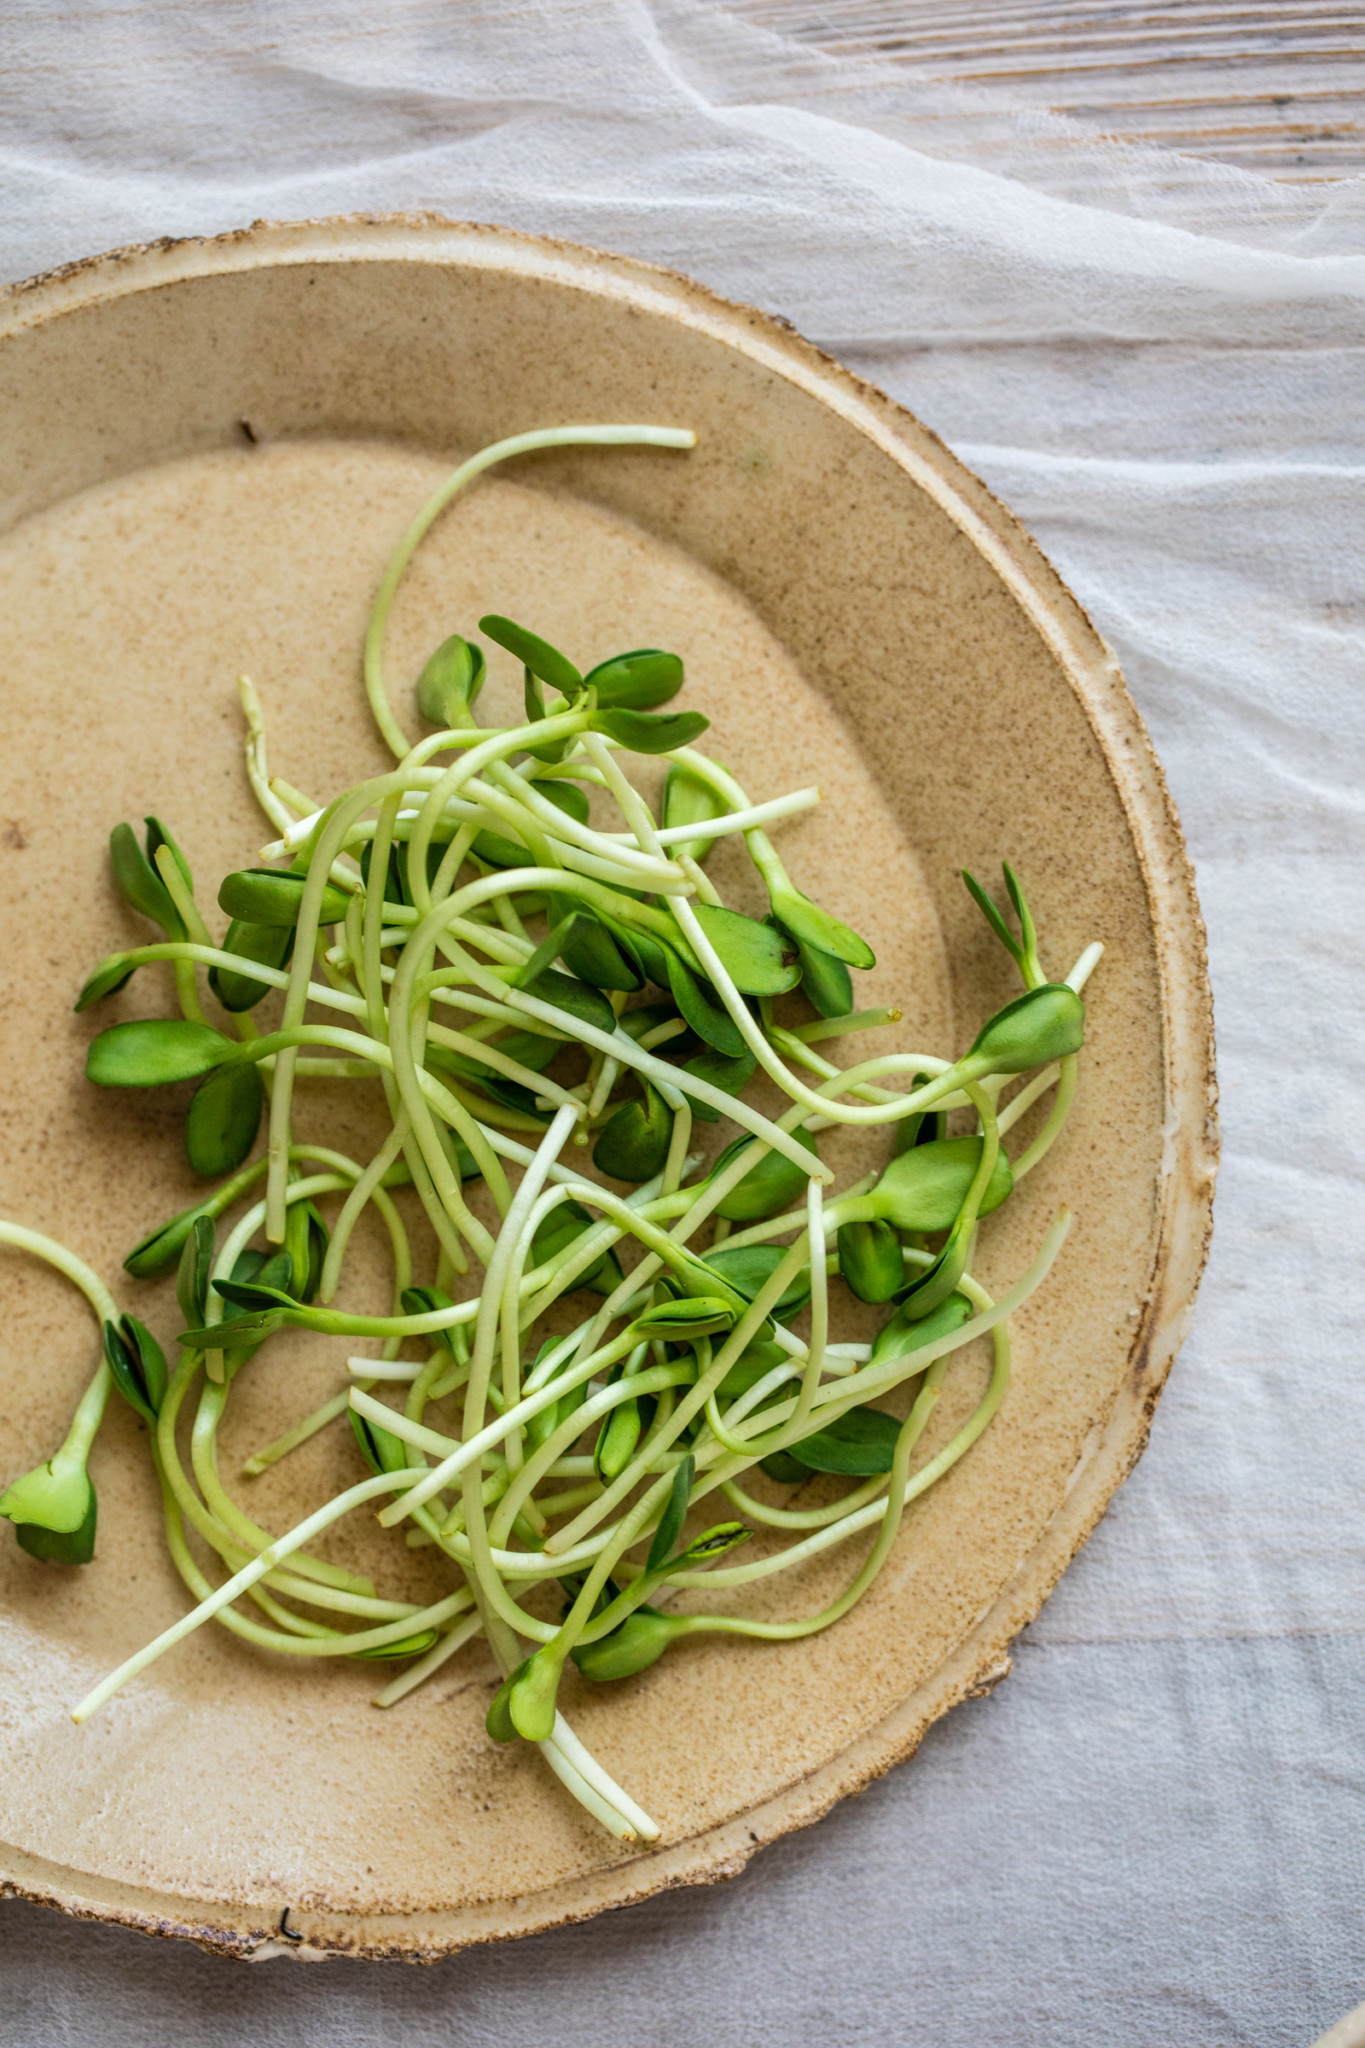 Fresh pea sprouts on beige plate.